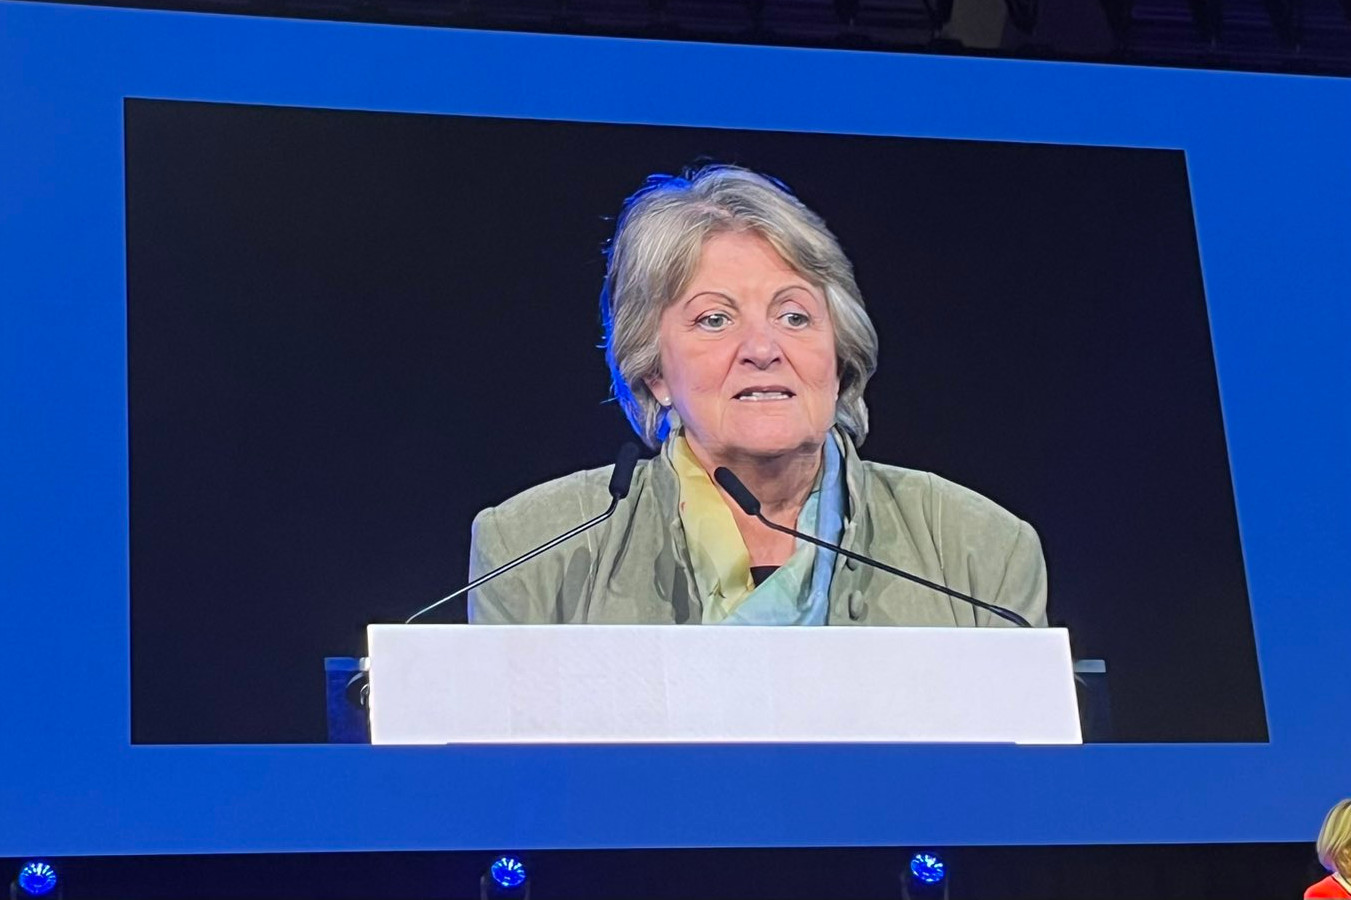 Video of a woman speaking, shown on a large screen